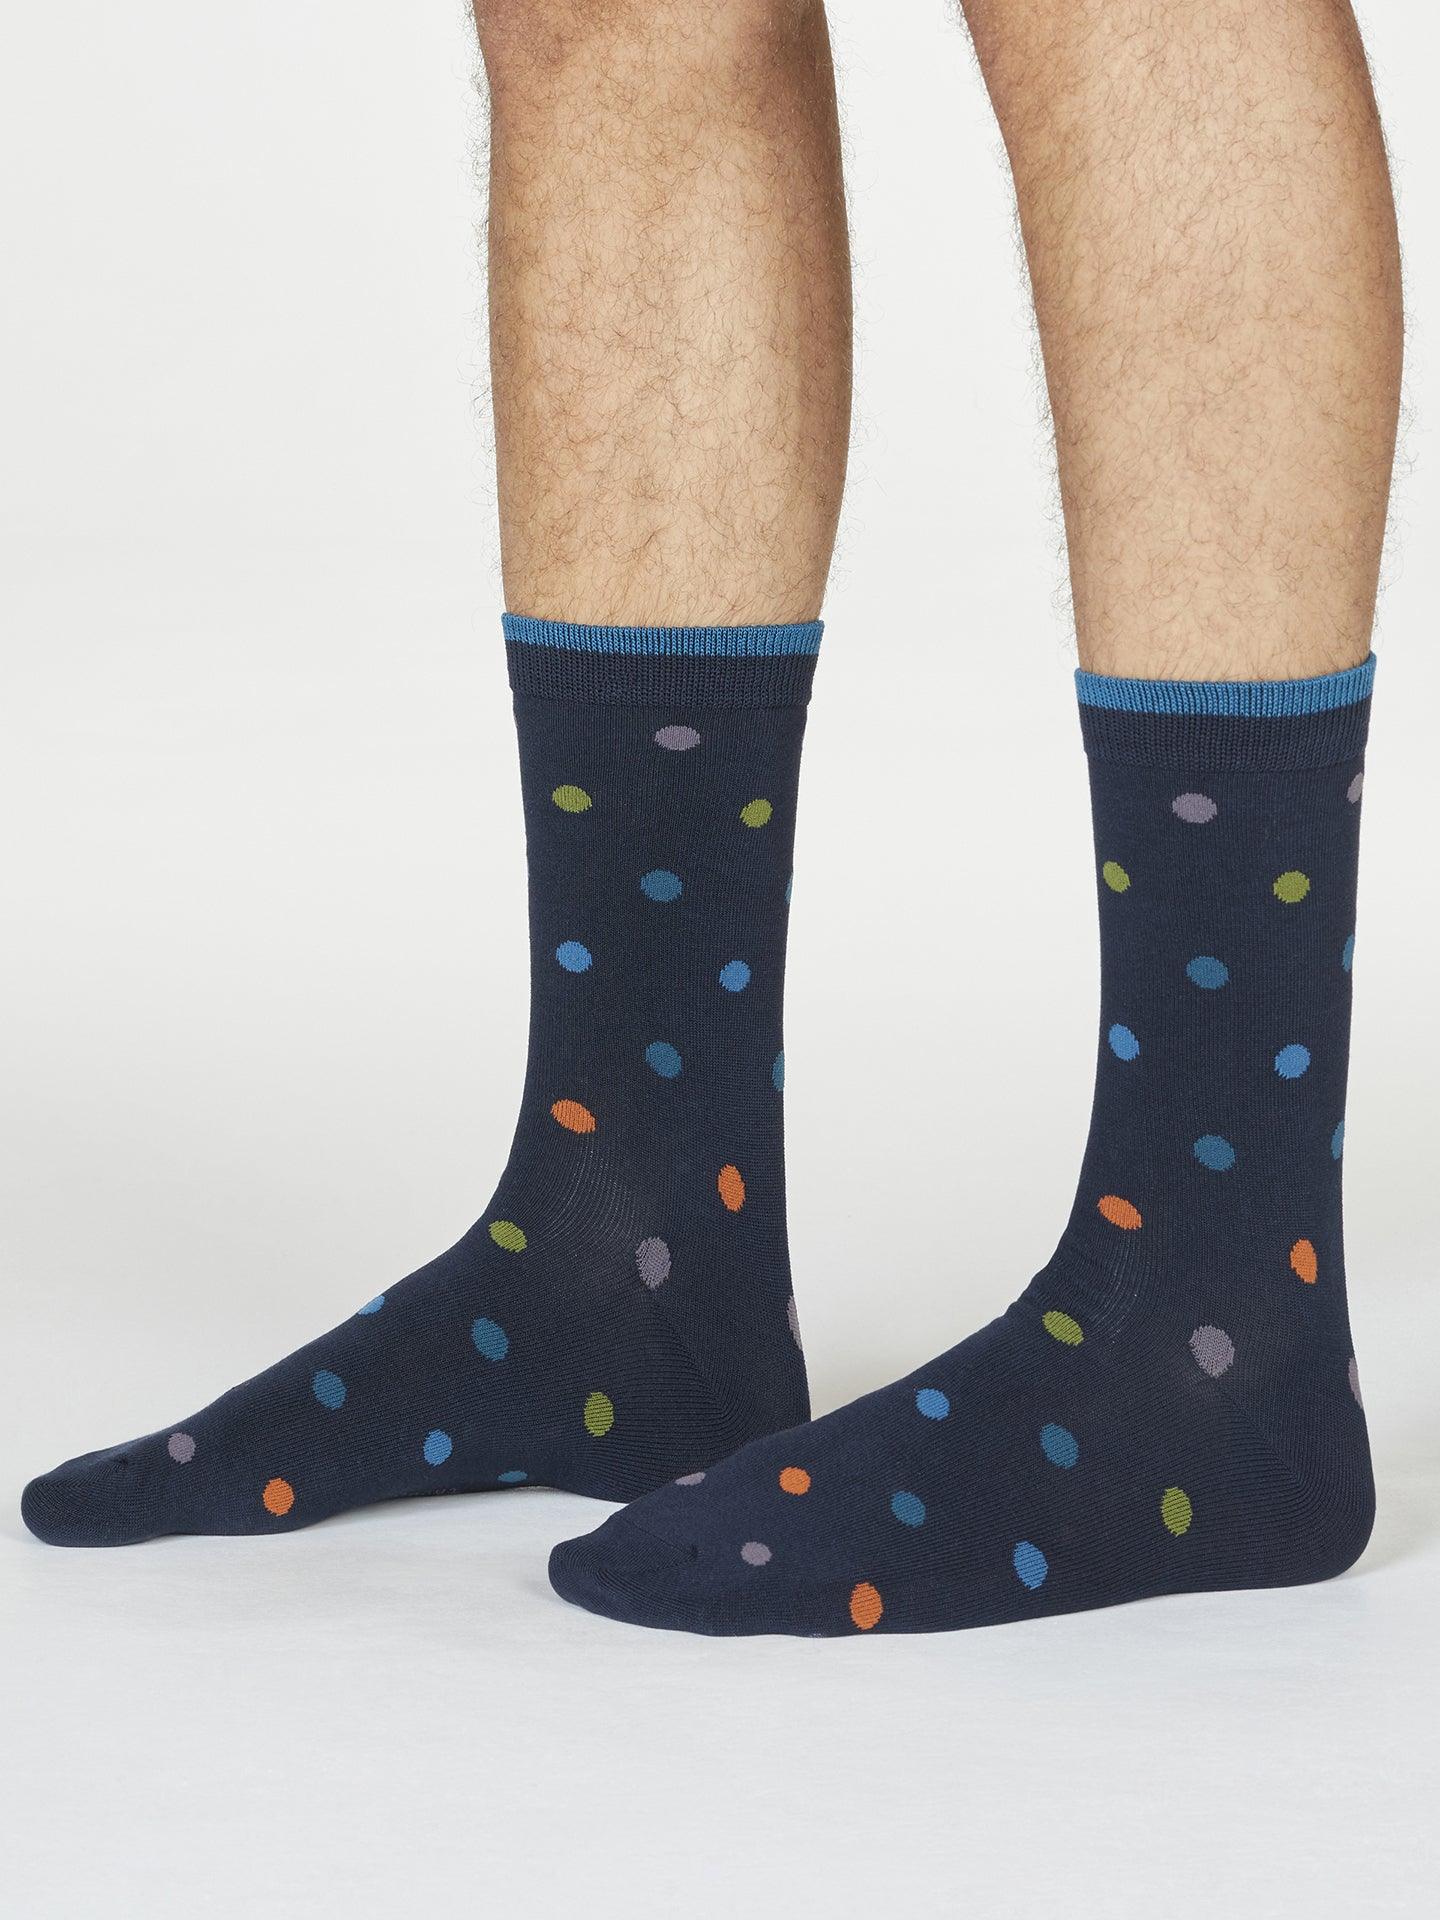 Ackley Mountain Bamboo Socks 3 Pack - Thought Clothing UK